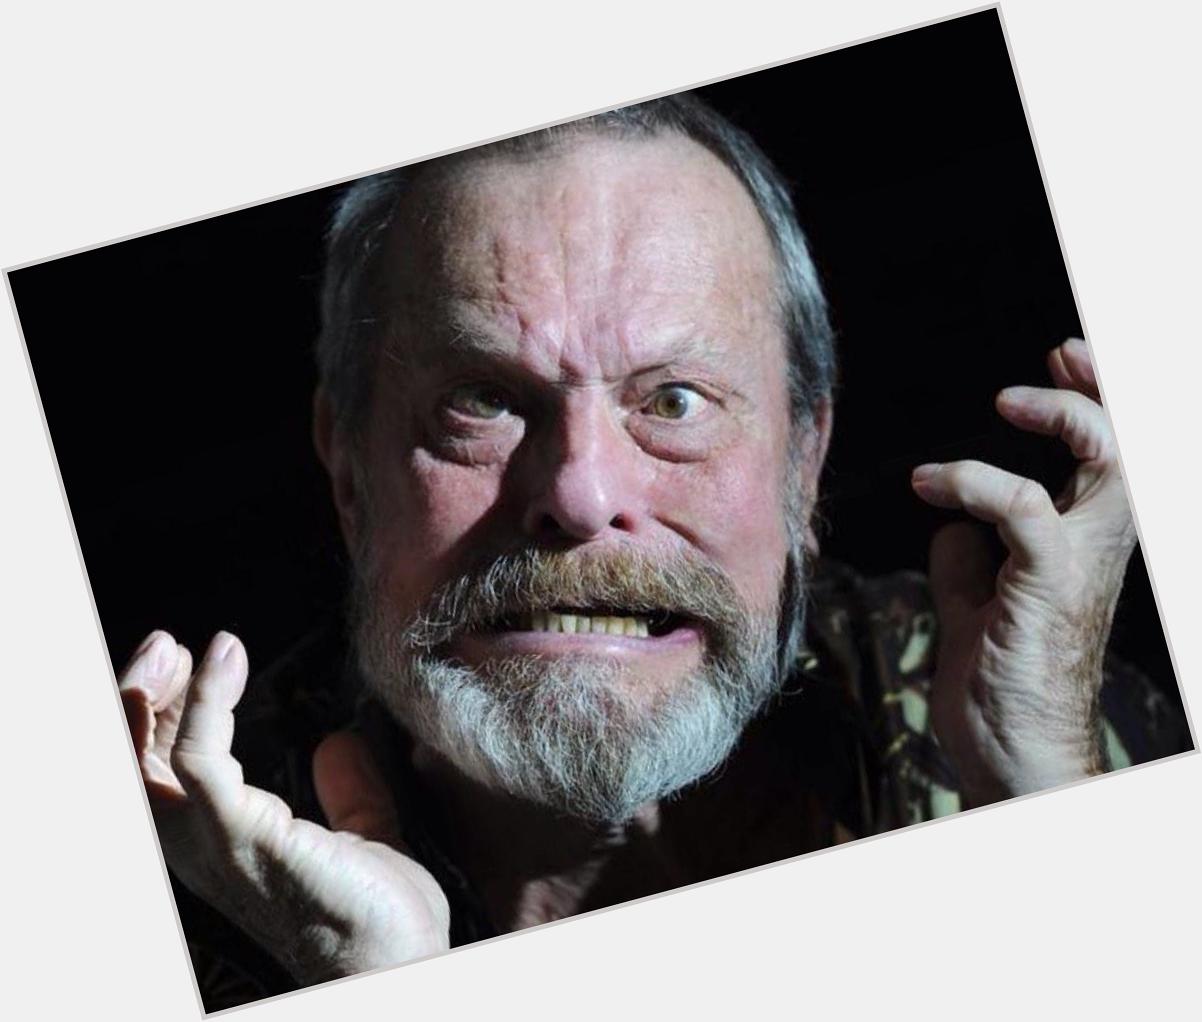 Happy birthday to Monty Pythons Terry Gilliam, here captured in a deeply introspective moment. 